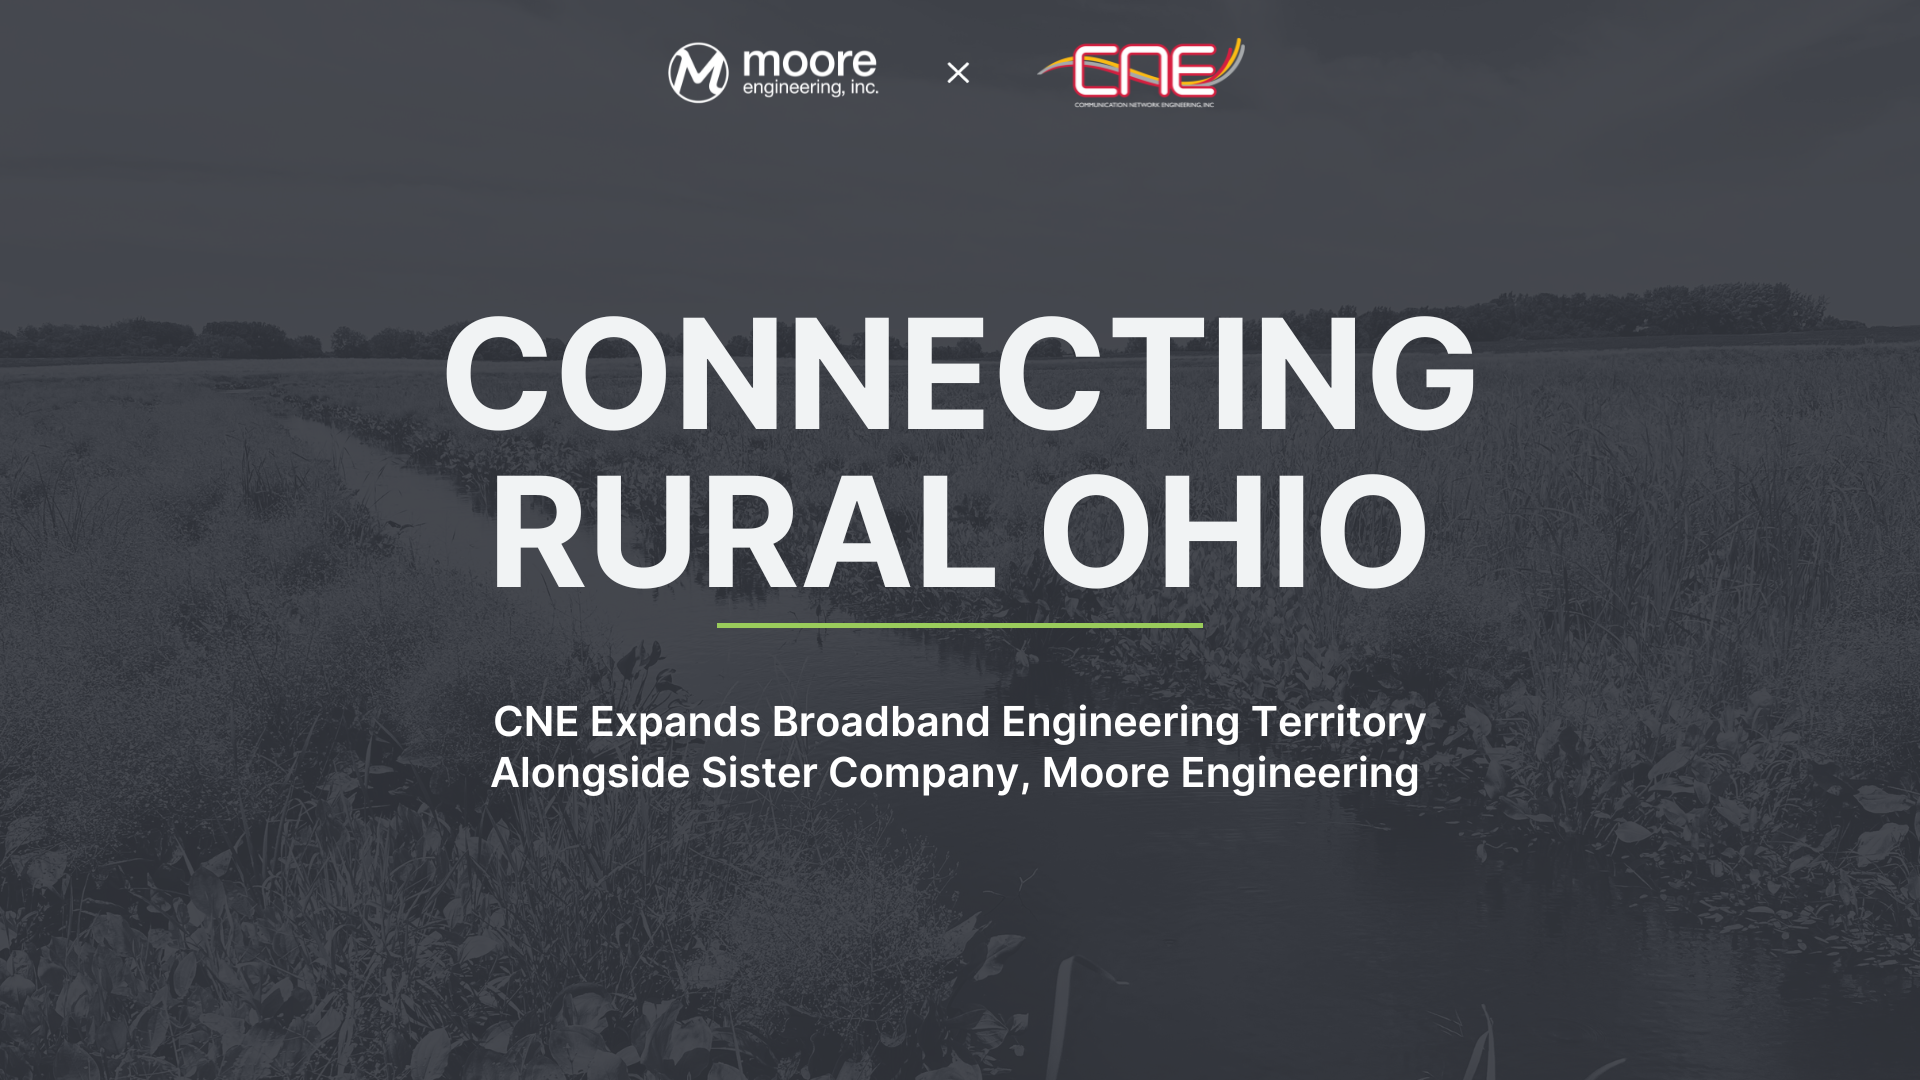 Moore Engineering and CNE completed broadband project to connect homes in rural ohio